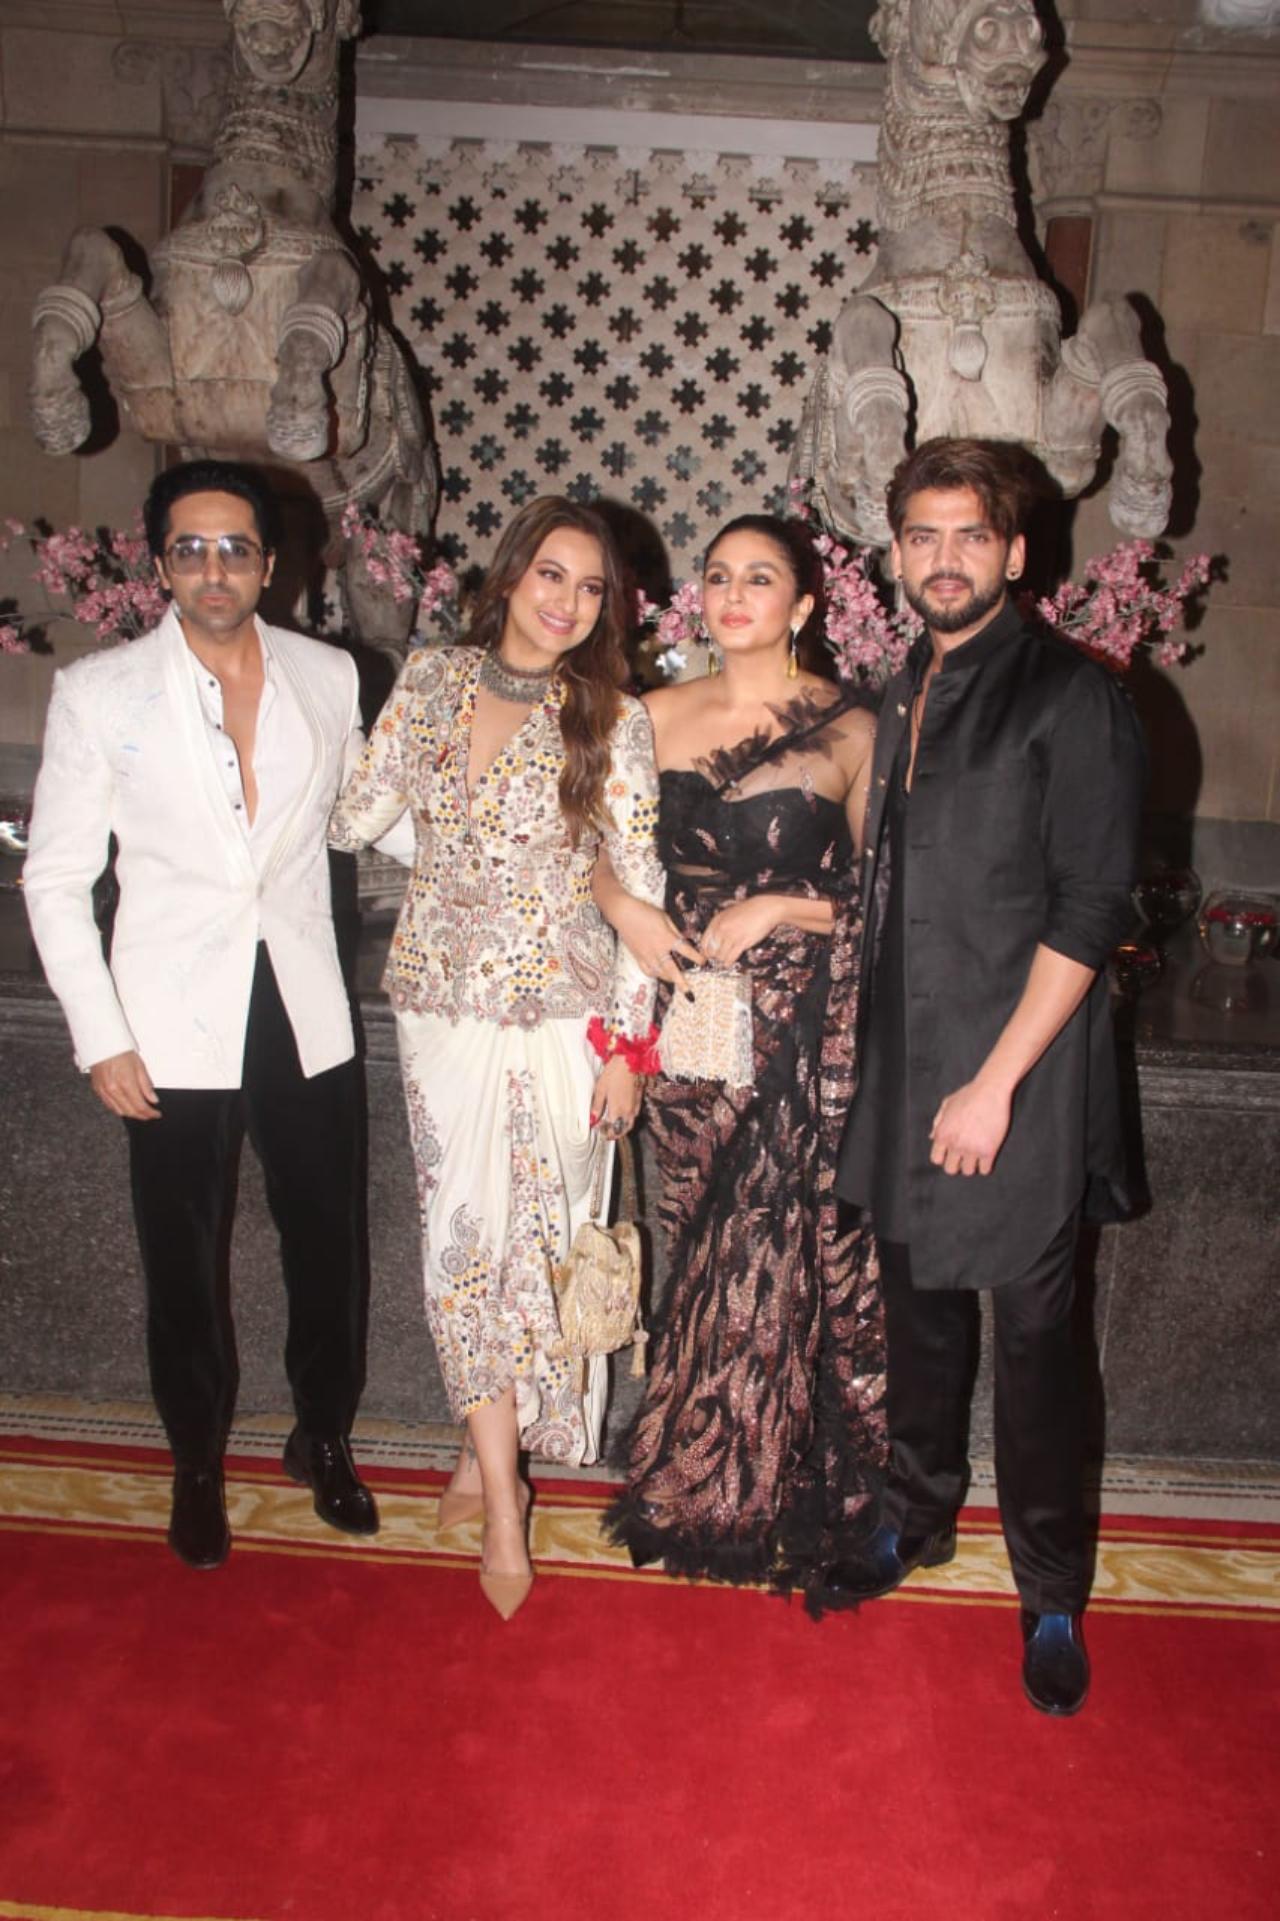 Sonakshi Sinha arrived with rumoured boyfriend and actor Zaheer Iqbal and close actor friend Huma Qureshi. Sonakshi looked stunning in a white printed outfit, while Sonakshi opted for a black saree ensemble. The trio also posed with Ayushmann Khurrana who gave major retro vibes with his outfit